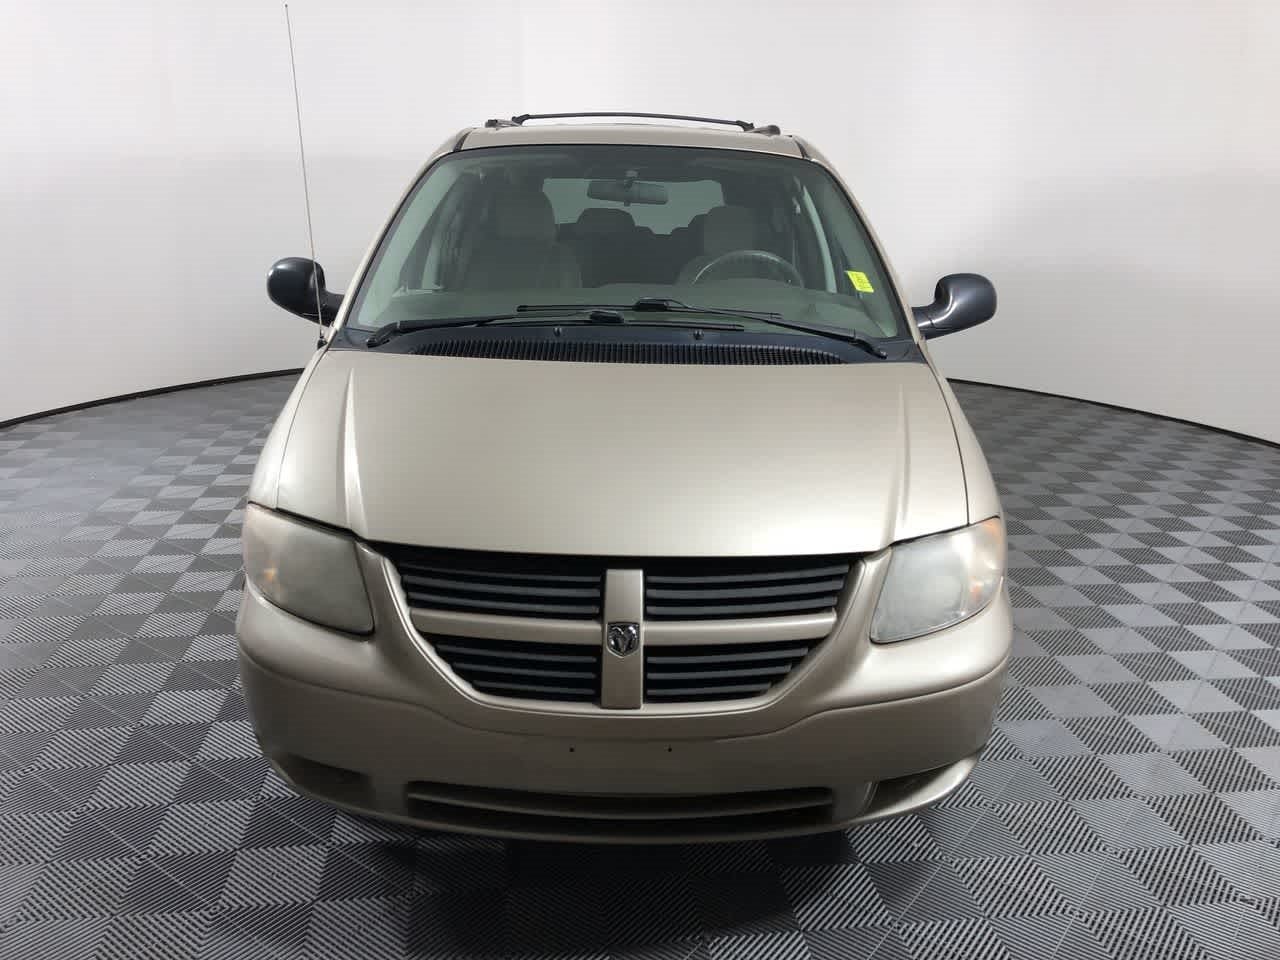 Used 2005 Dodge Grand Caravan SE with VIN 1D4GP24RX5B362270 for sale in Rushville, IN